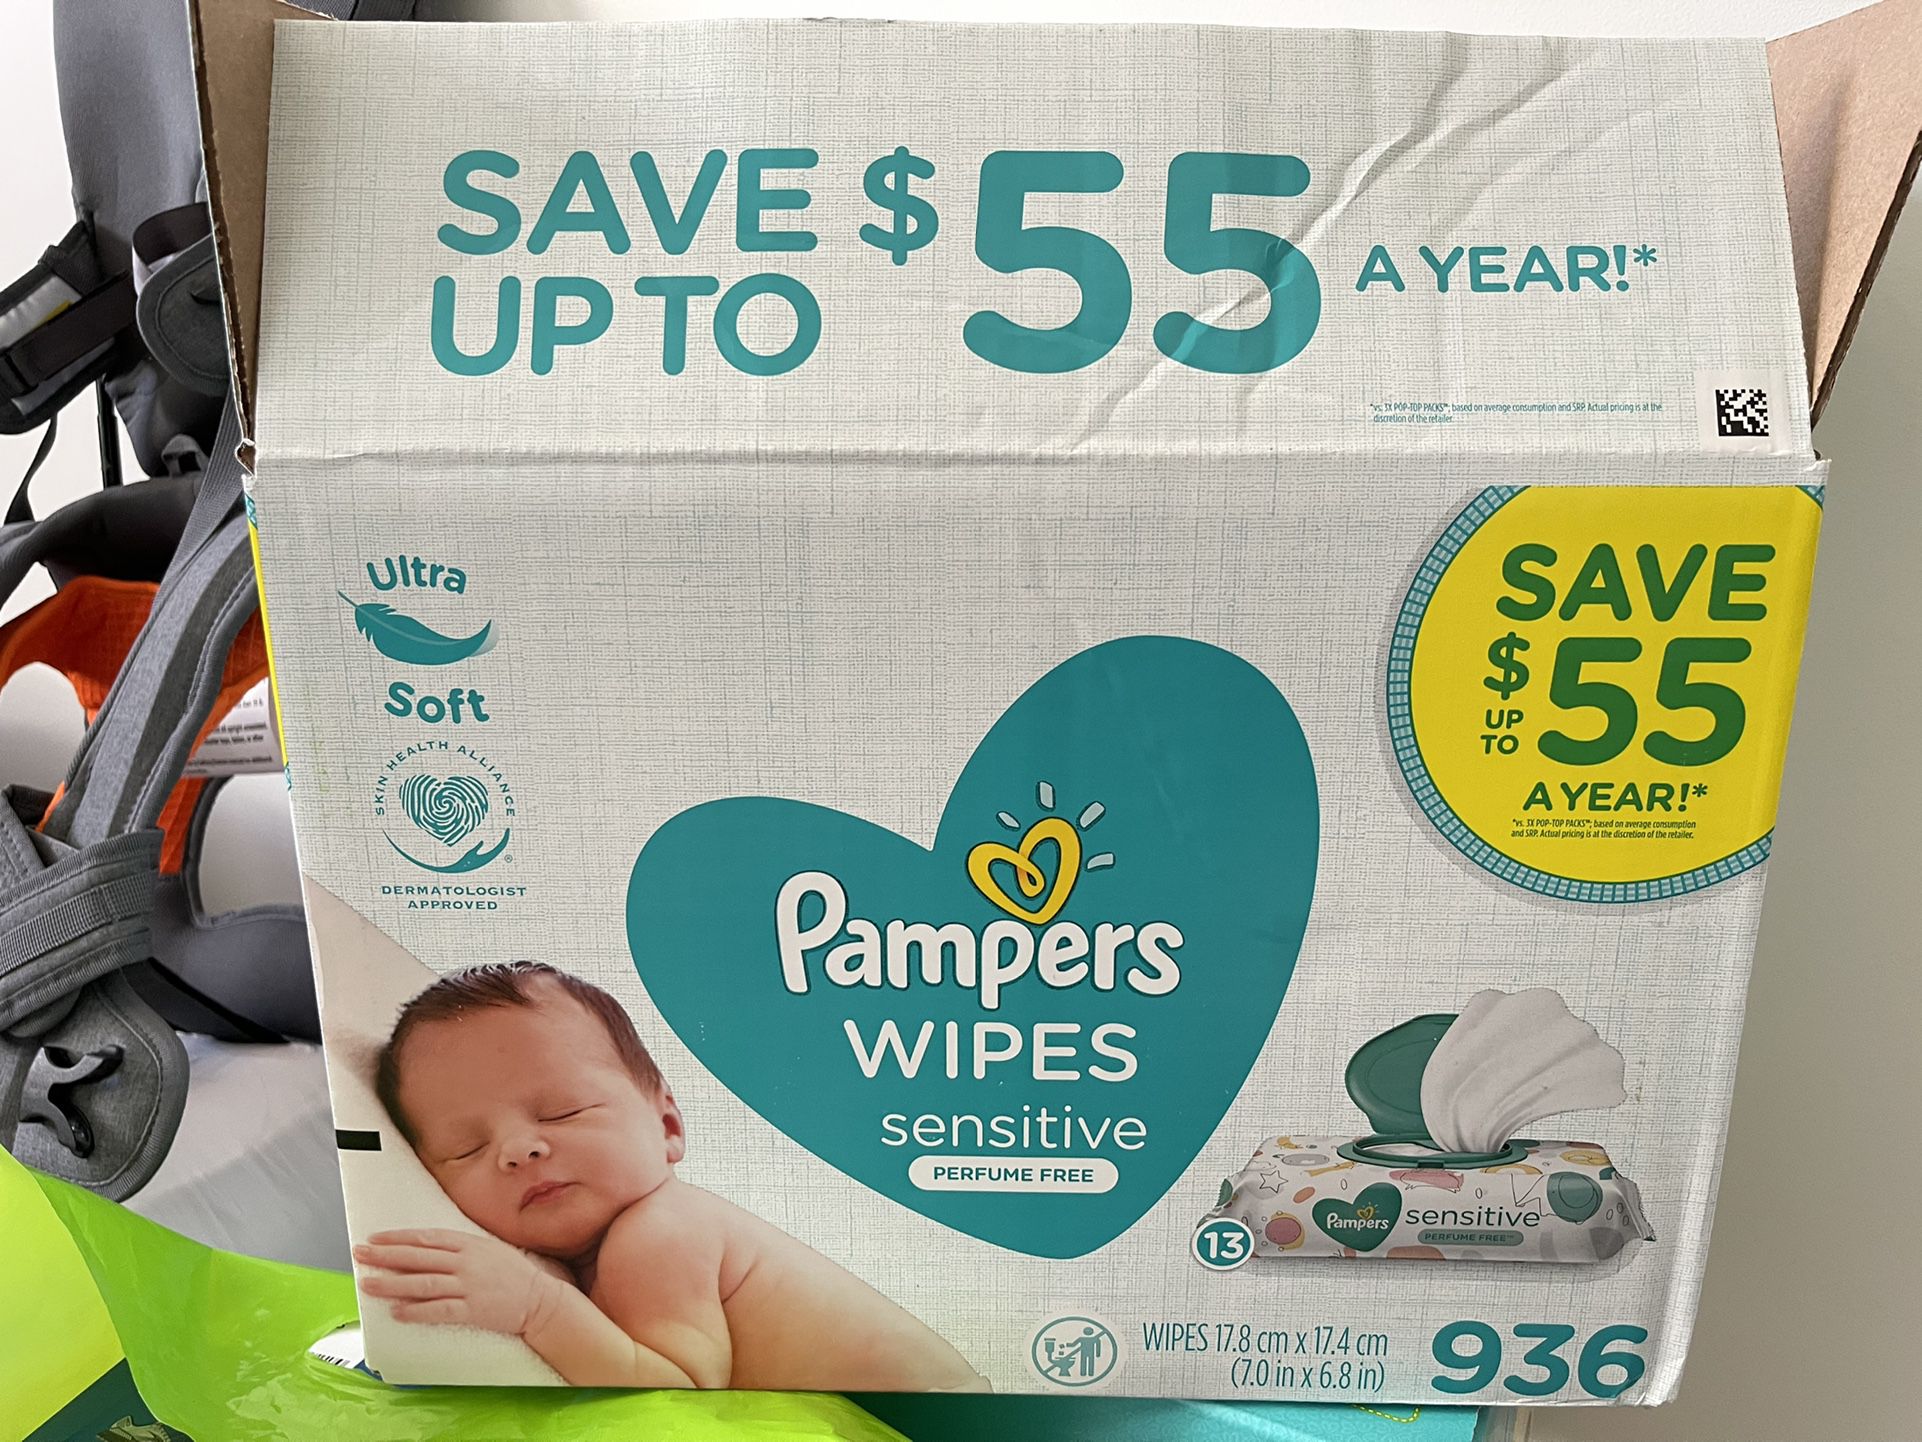 Pampers Wipes Sensitive Qty 11